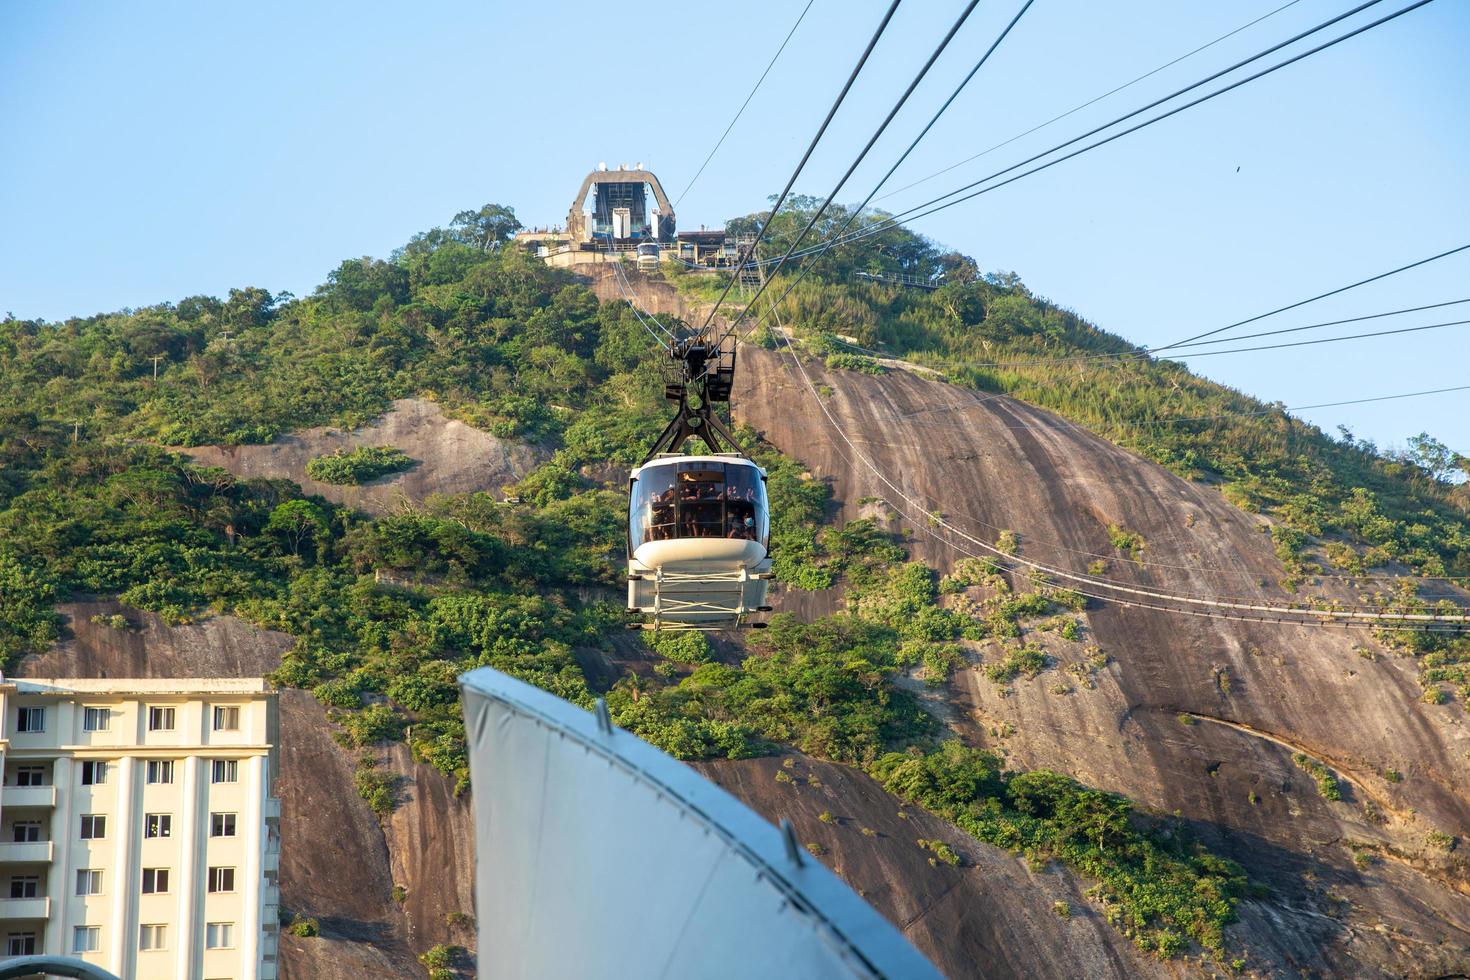 Rio de Janeiro, Brazil, OCT 2019 - Cable car at Sugar Loaf Mountain, view of Rio cityscape and Sugarloaf Cable Car. photo